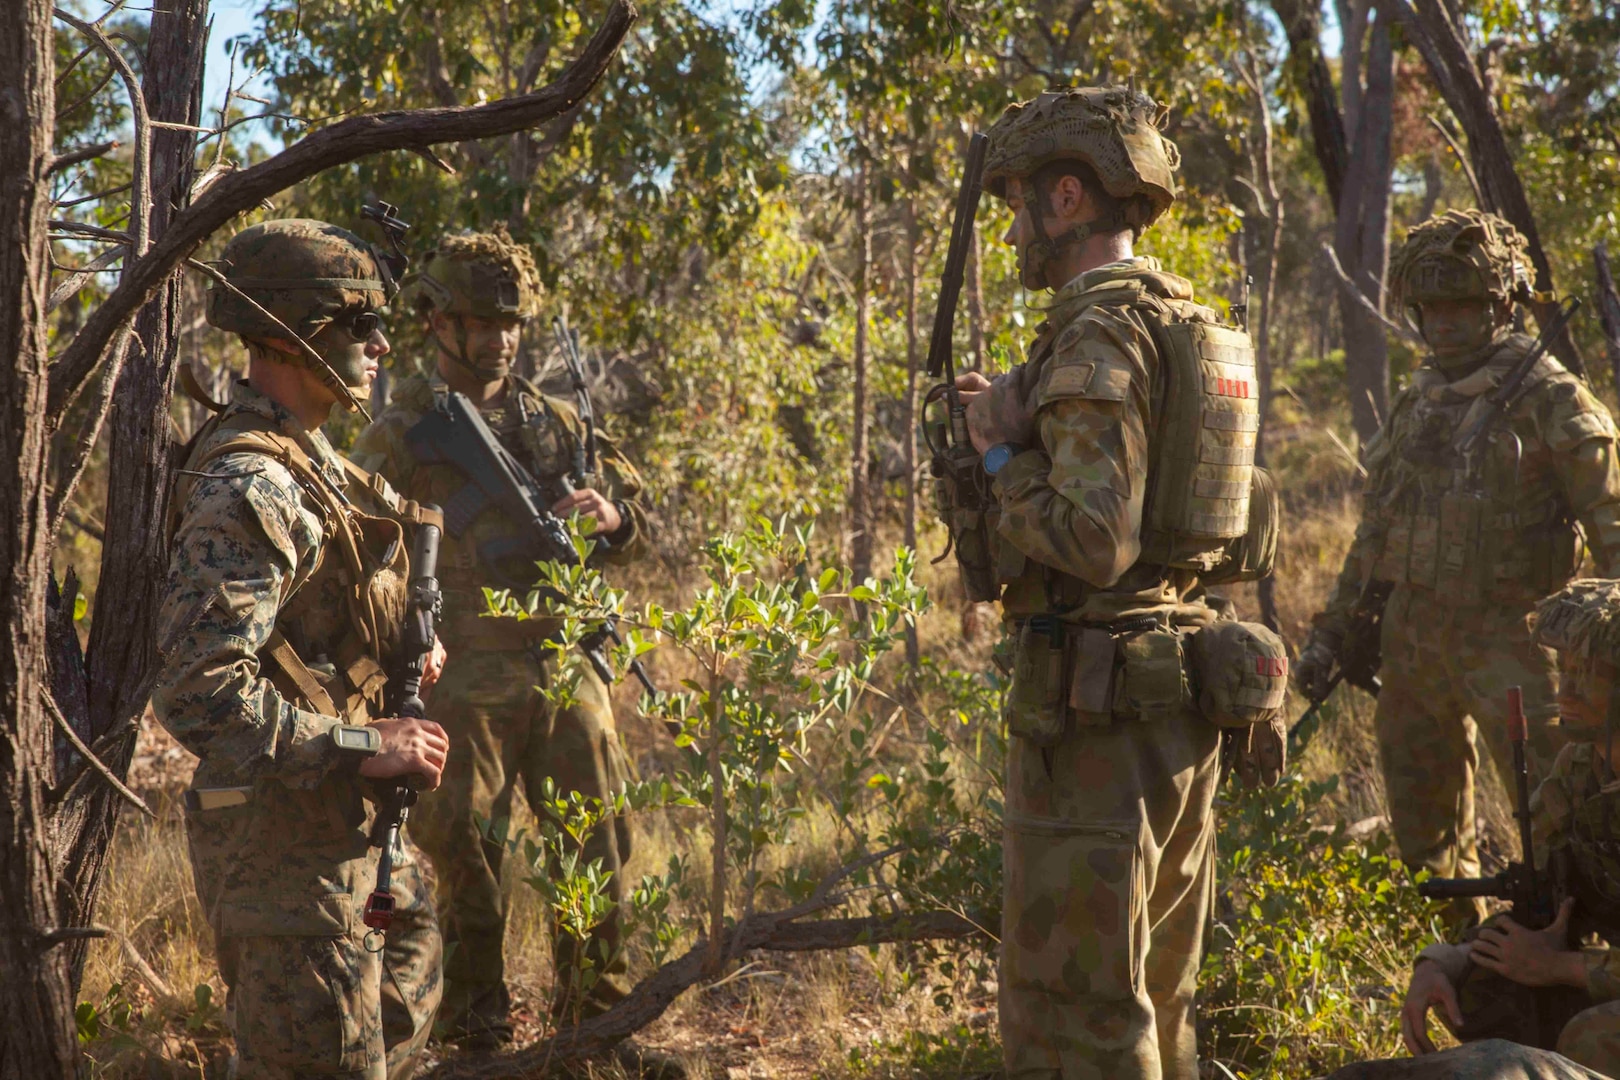 Marines with Lima Company, Battalion Landing Team, 3rd Battalion, 5th Marines, 31st Marine Expeditionary Unit, and Australian Army Soldiers discusses troop movements during an amphibious landing as part of Talisman Saber 17, July 15th, 2017. Talisman Saber is a biennial exercise designed to improve the interoperability between Australian and U.S. forces. The 31st MEU is taking part in Talisman Saber 17 while deployed on its regularly-scheduled patrol of the Indo-Asia-Pacific region. (U.S. Marine Corps photo by Lance Cpl. Jonah Baase/Released)